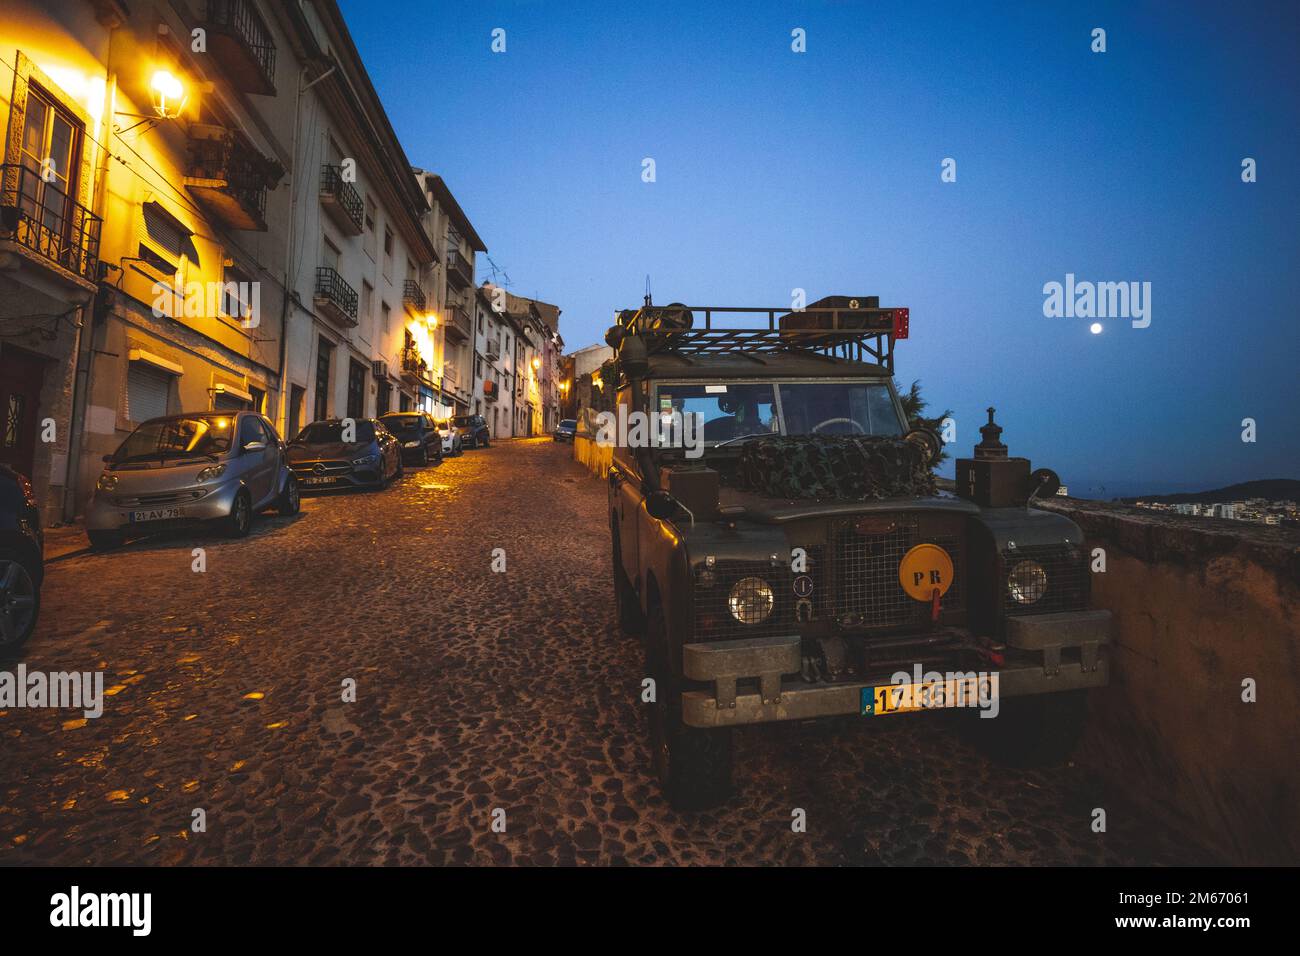 The moon rises at night in Coimbra, illuminating a 1970s Land Rover Series 2A/3, Portugal. Stock Photo